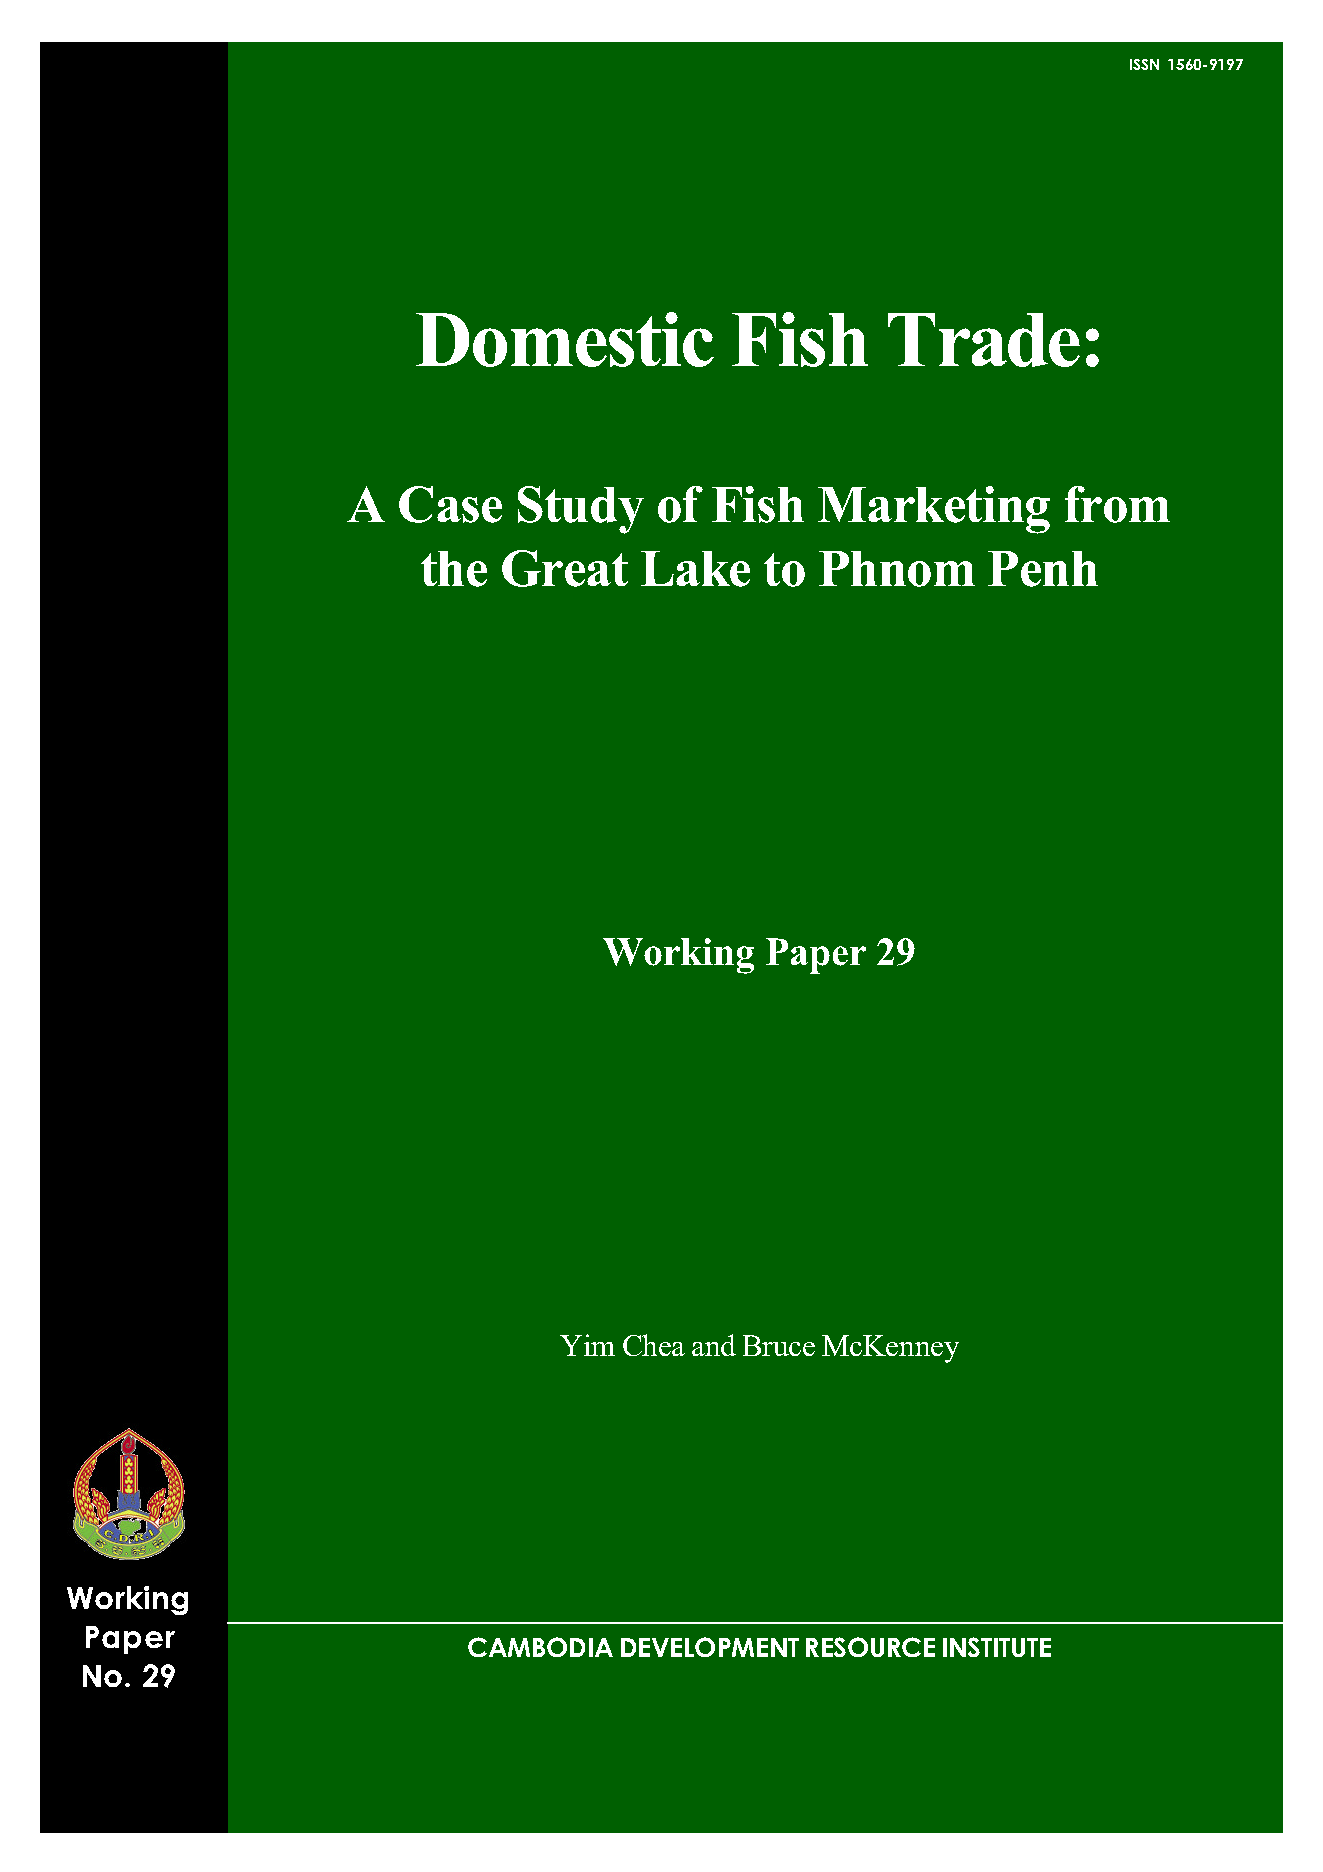 thesis on fish marketing